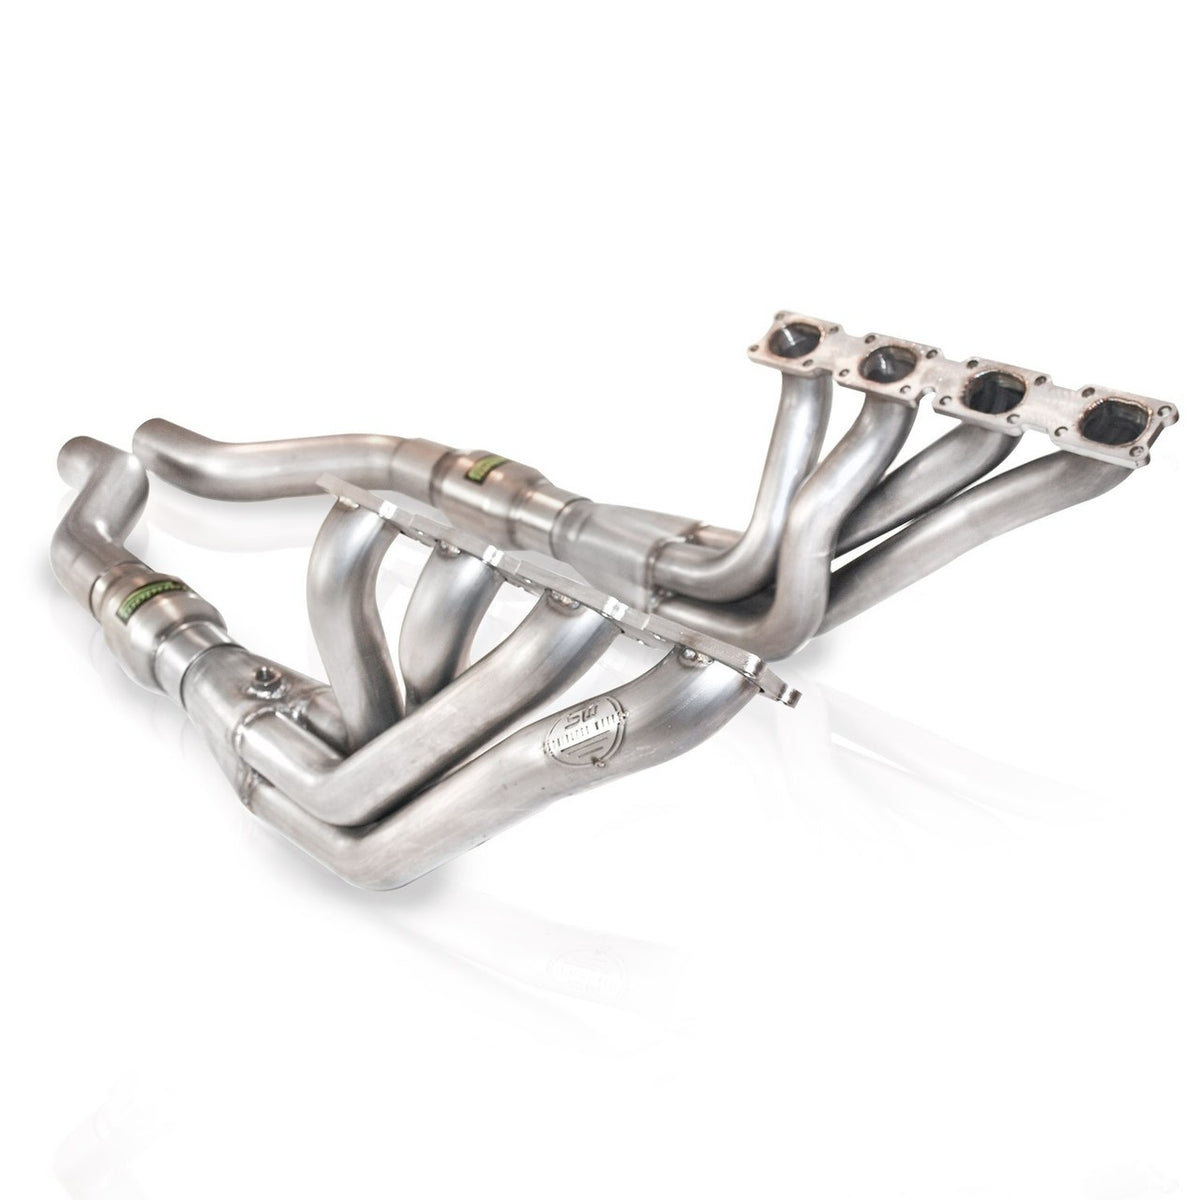 1990-1995 CORVETTE HEADERS: 2" CATTED, STAINLESS WORKS